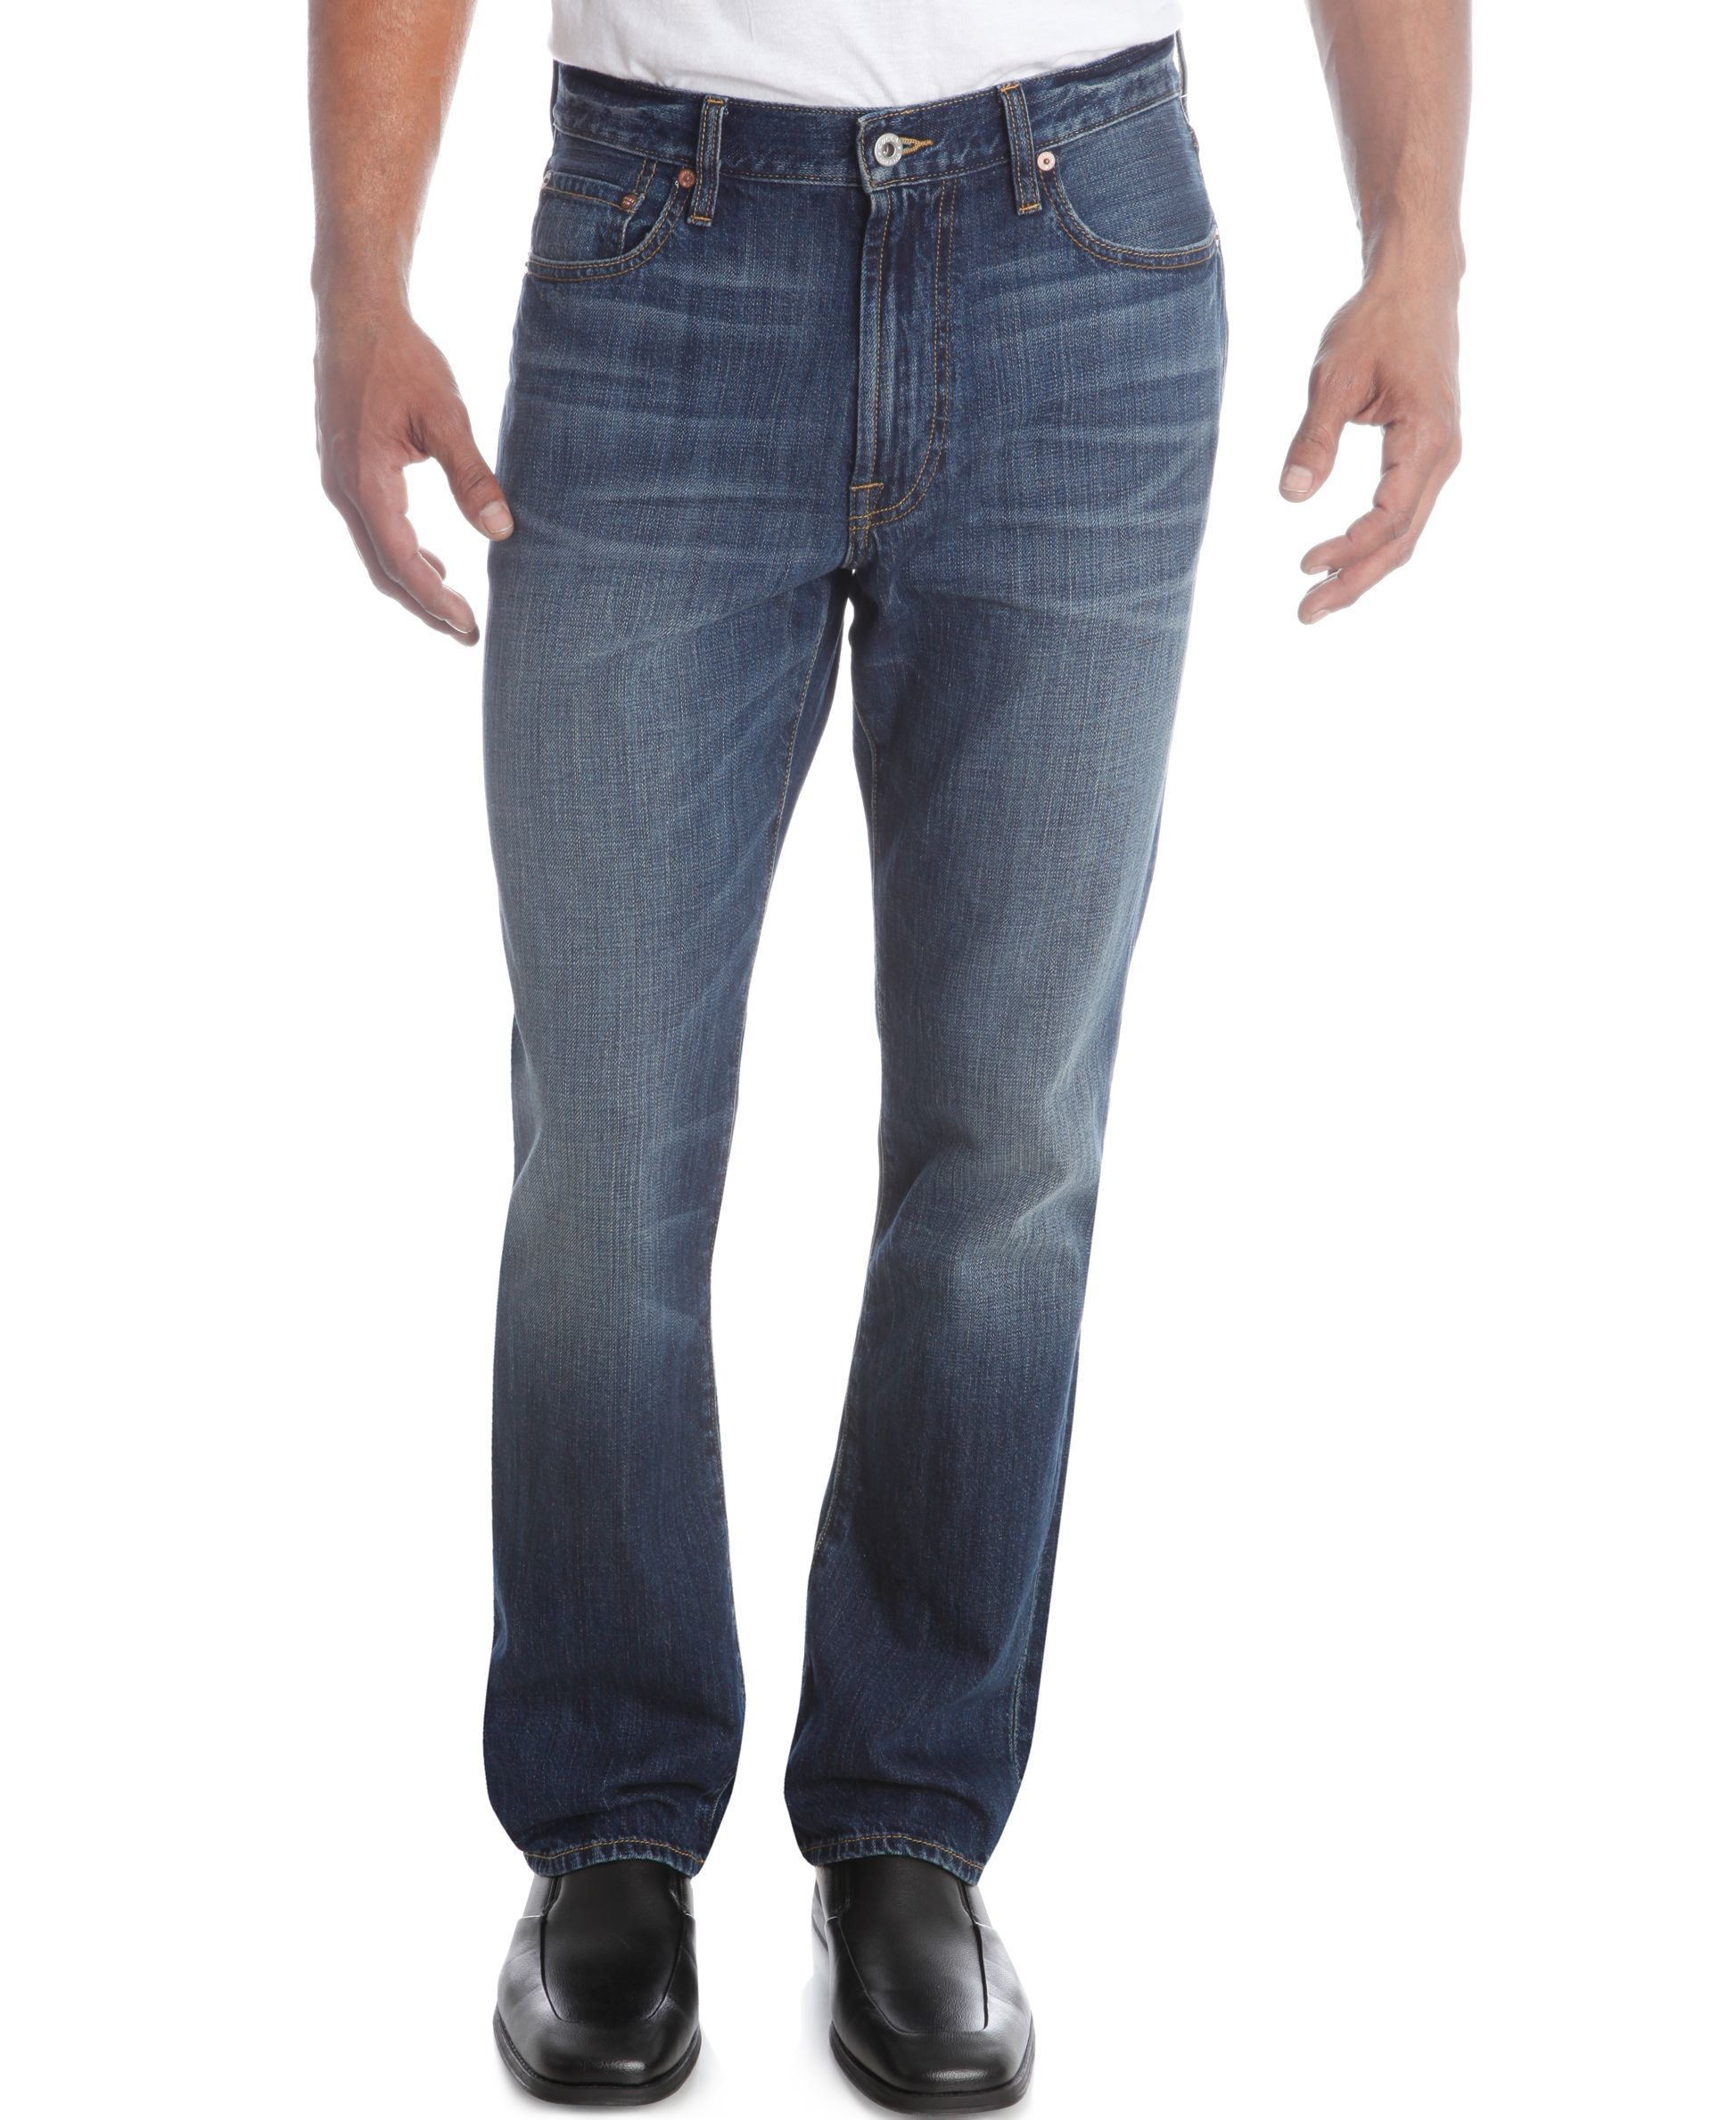 Lyst - Lucky brand 181 Relaxed-straight Jeans in Blue for Men